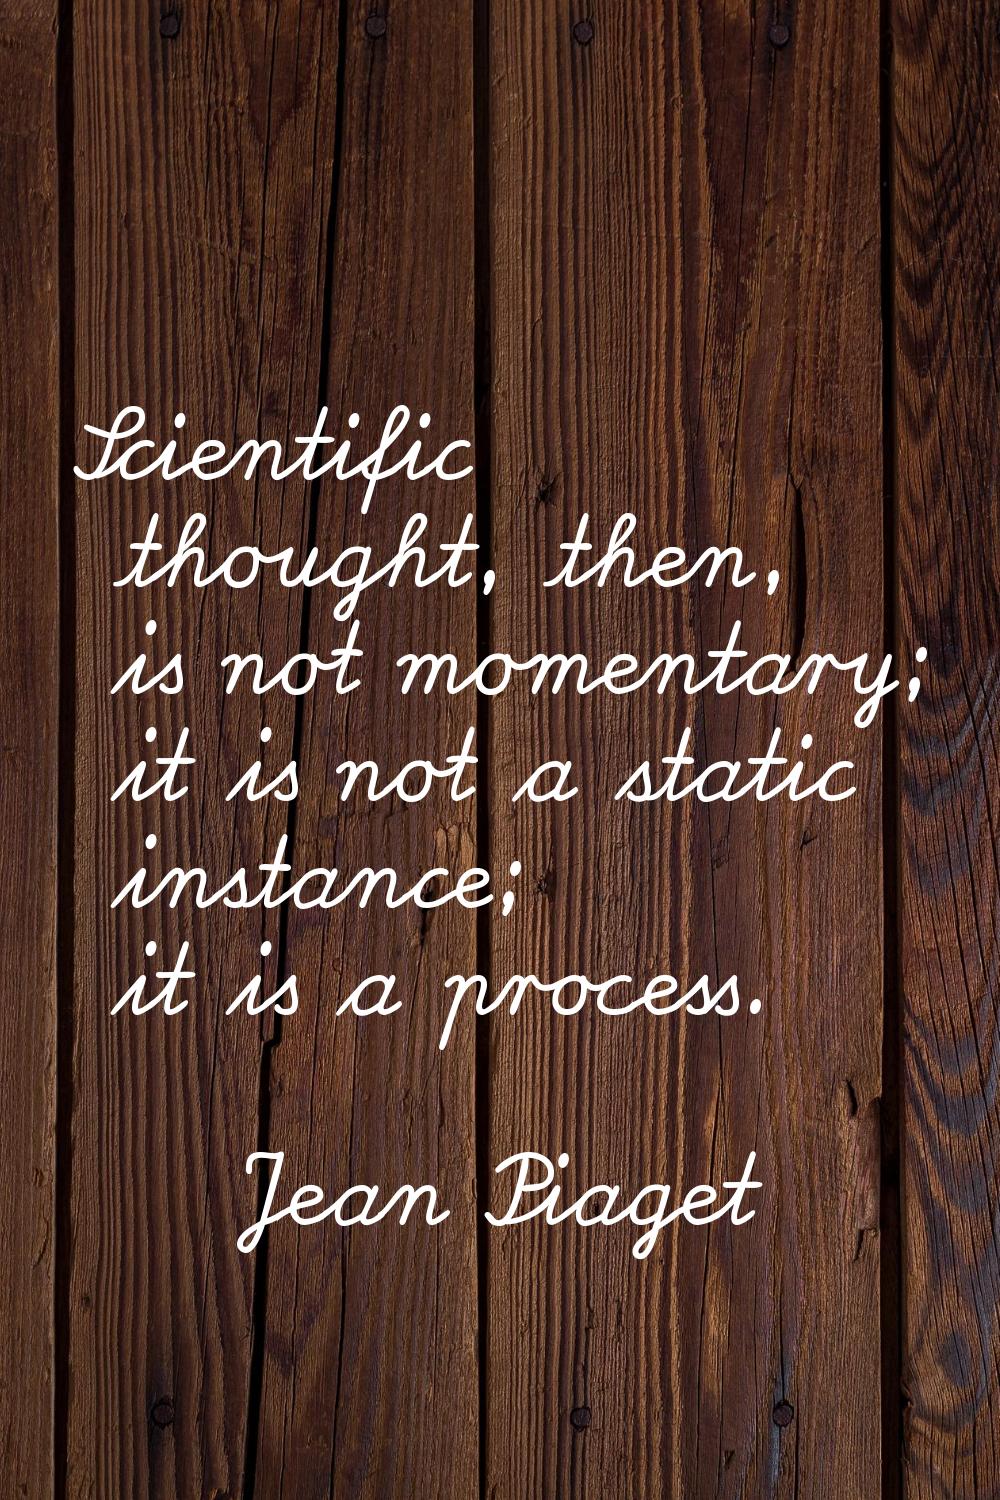 Scientific thought, then, is not momentary; it is not a static instance; it is a process.